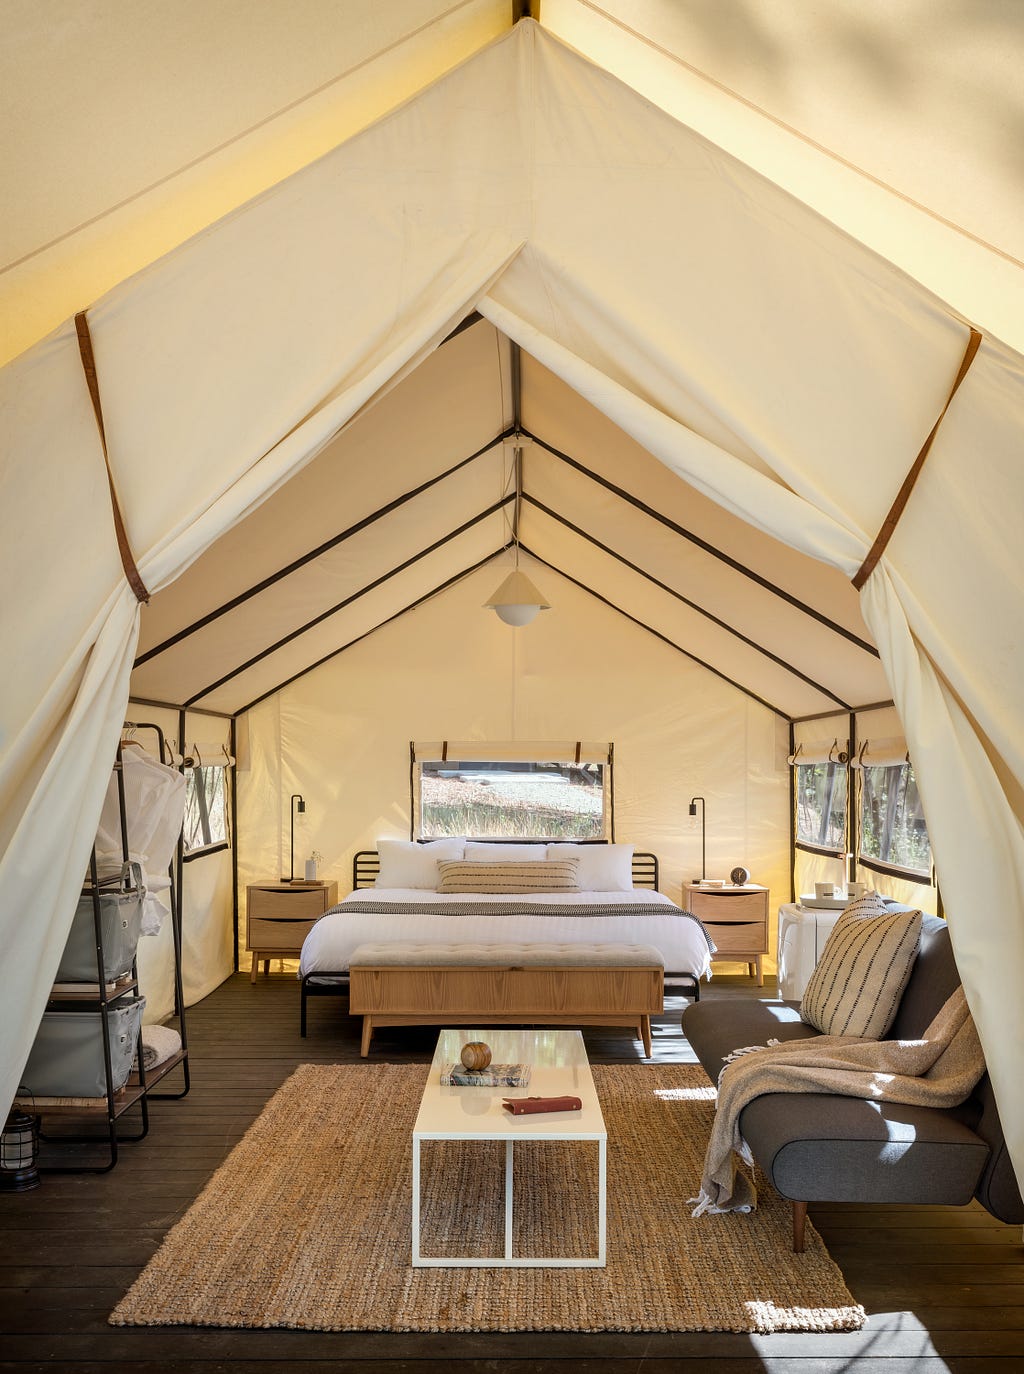 For a Sierra getaway AutoCamp at Yosemite in Midpines has luxury tents with king beds. (photo courtesy of Aaron Leitz)